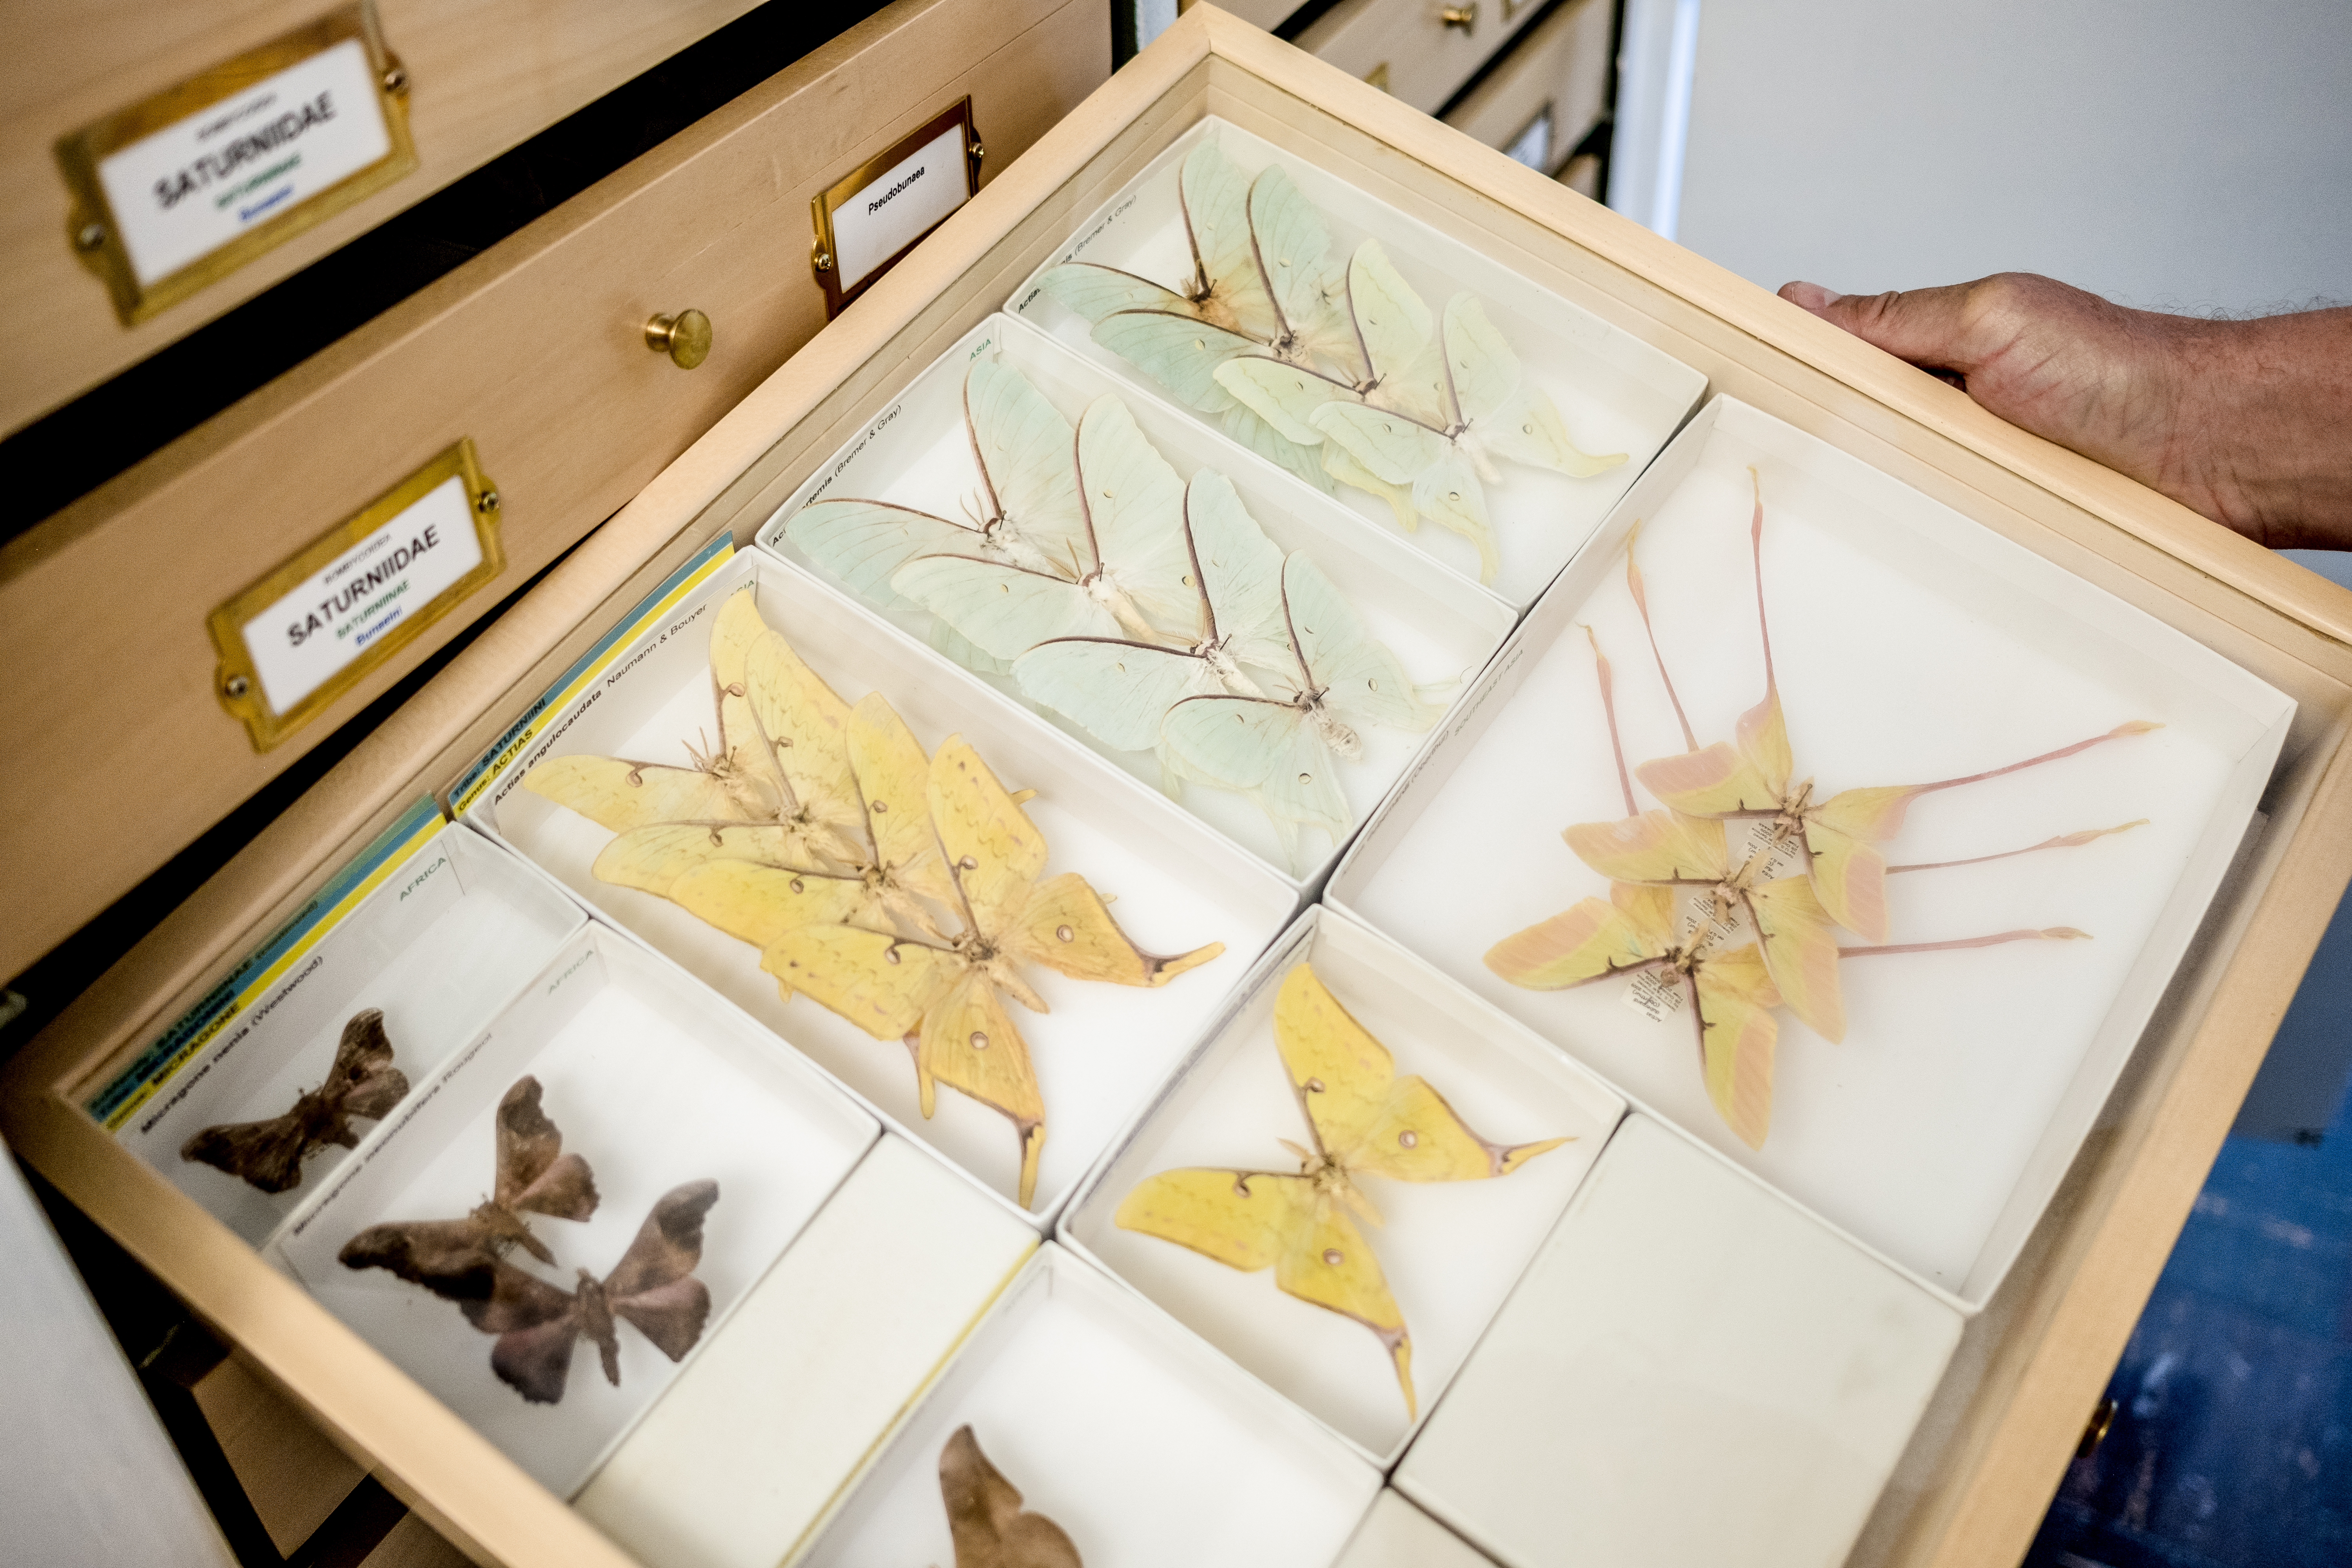 Specimens in a drawer